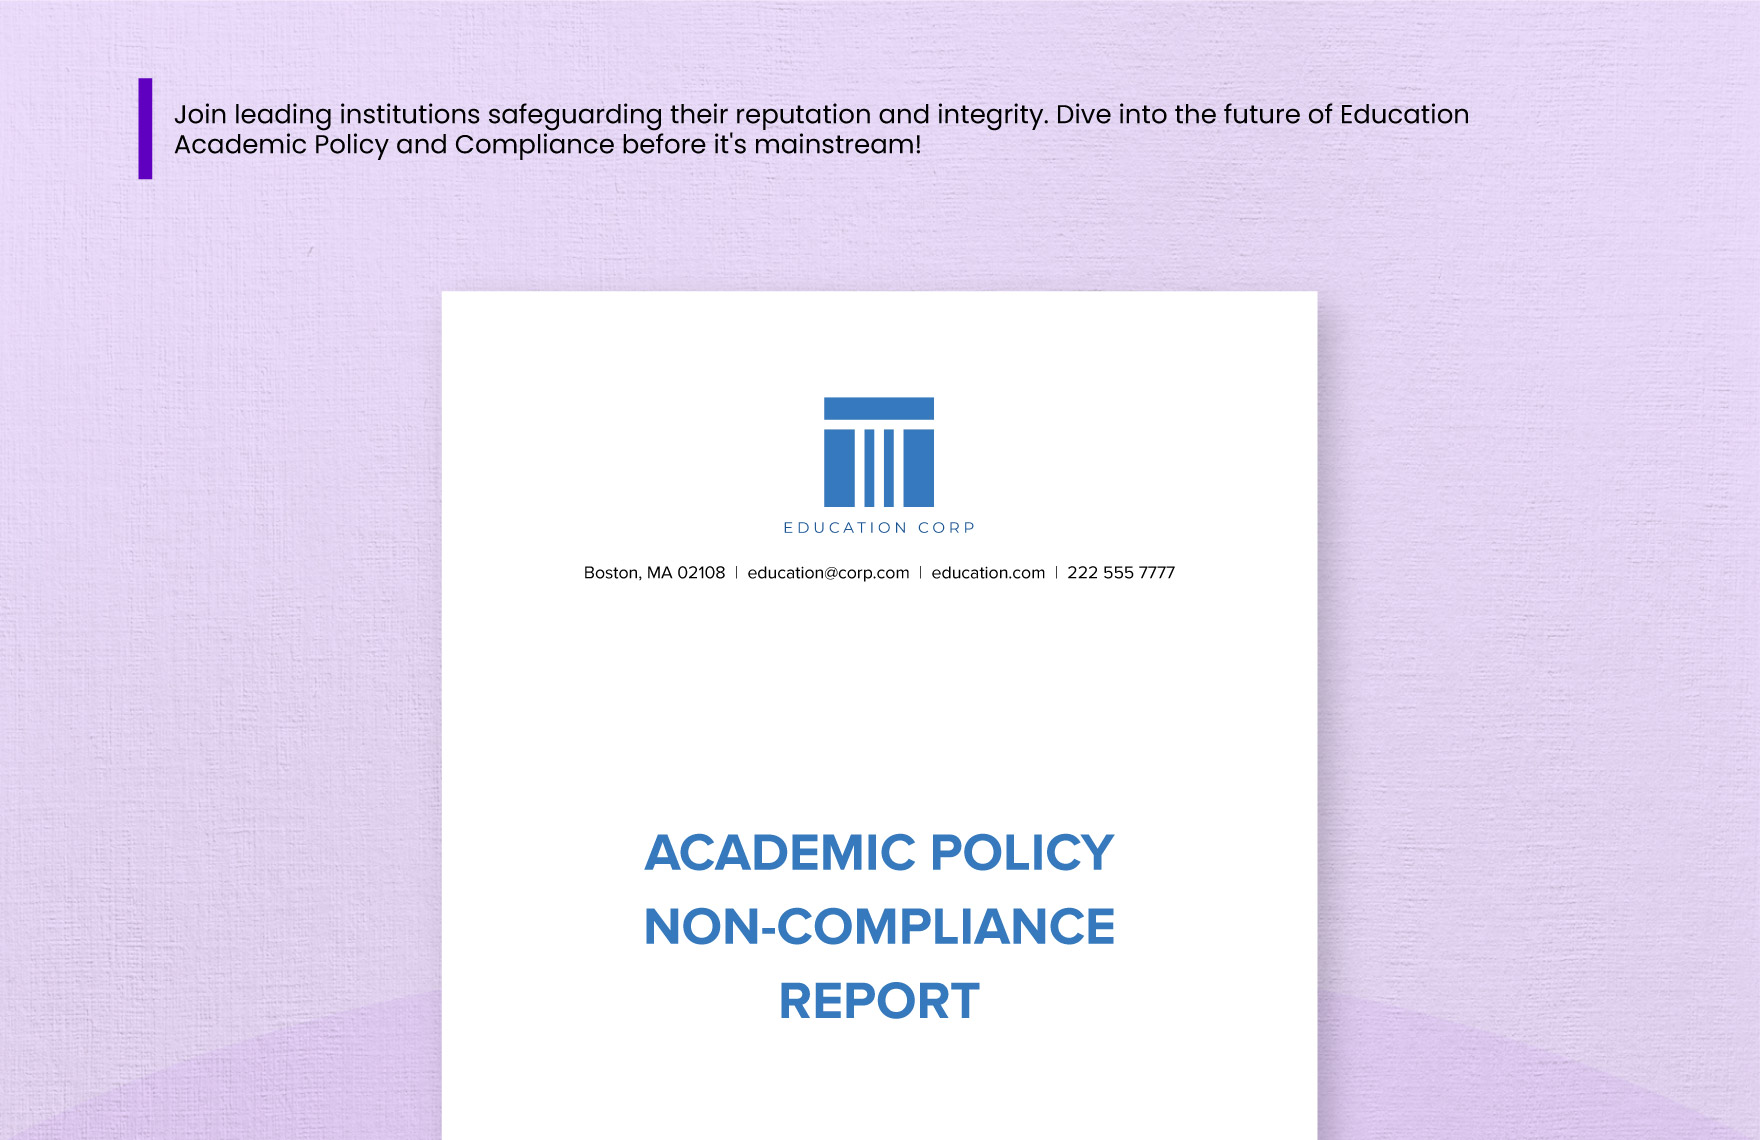 Academic Policy Non-Compliance Report Template